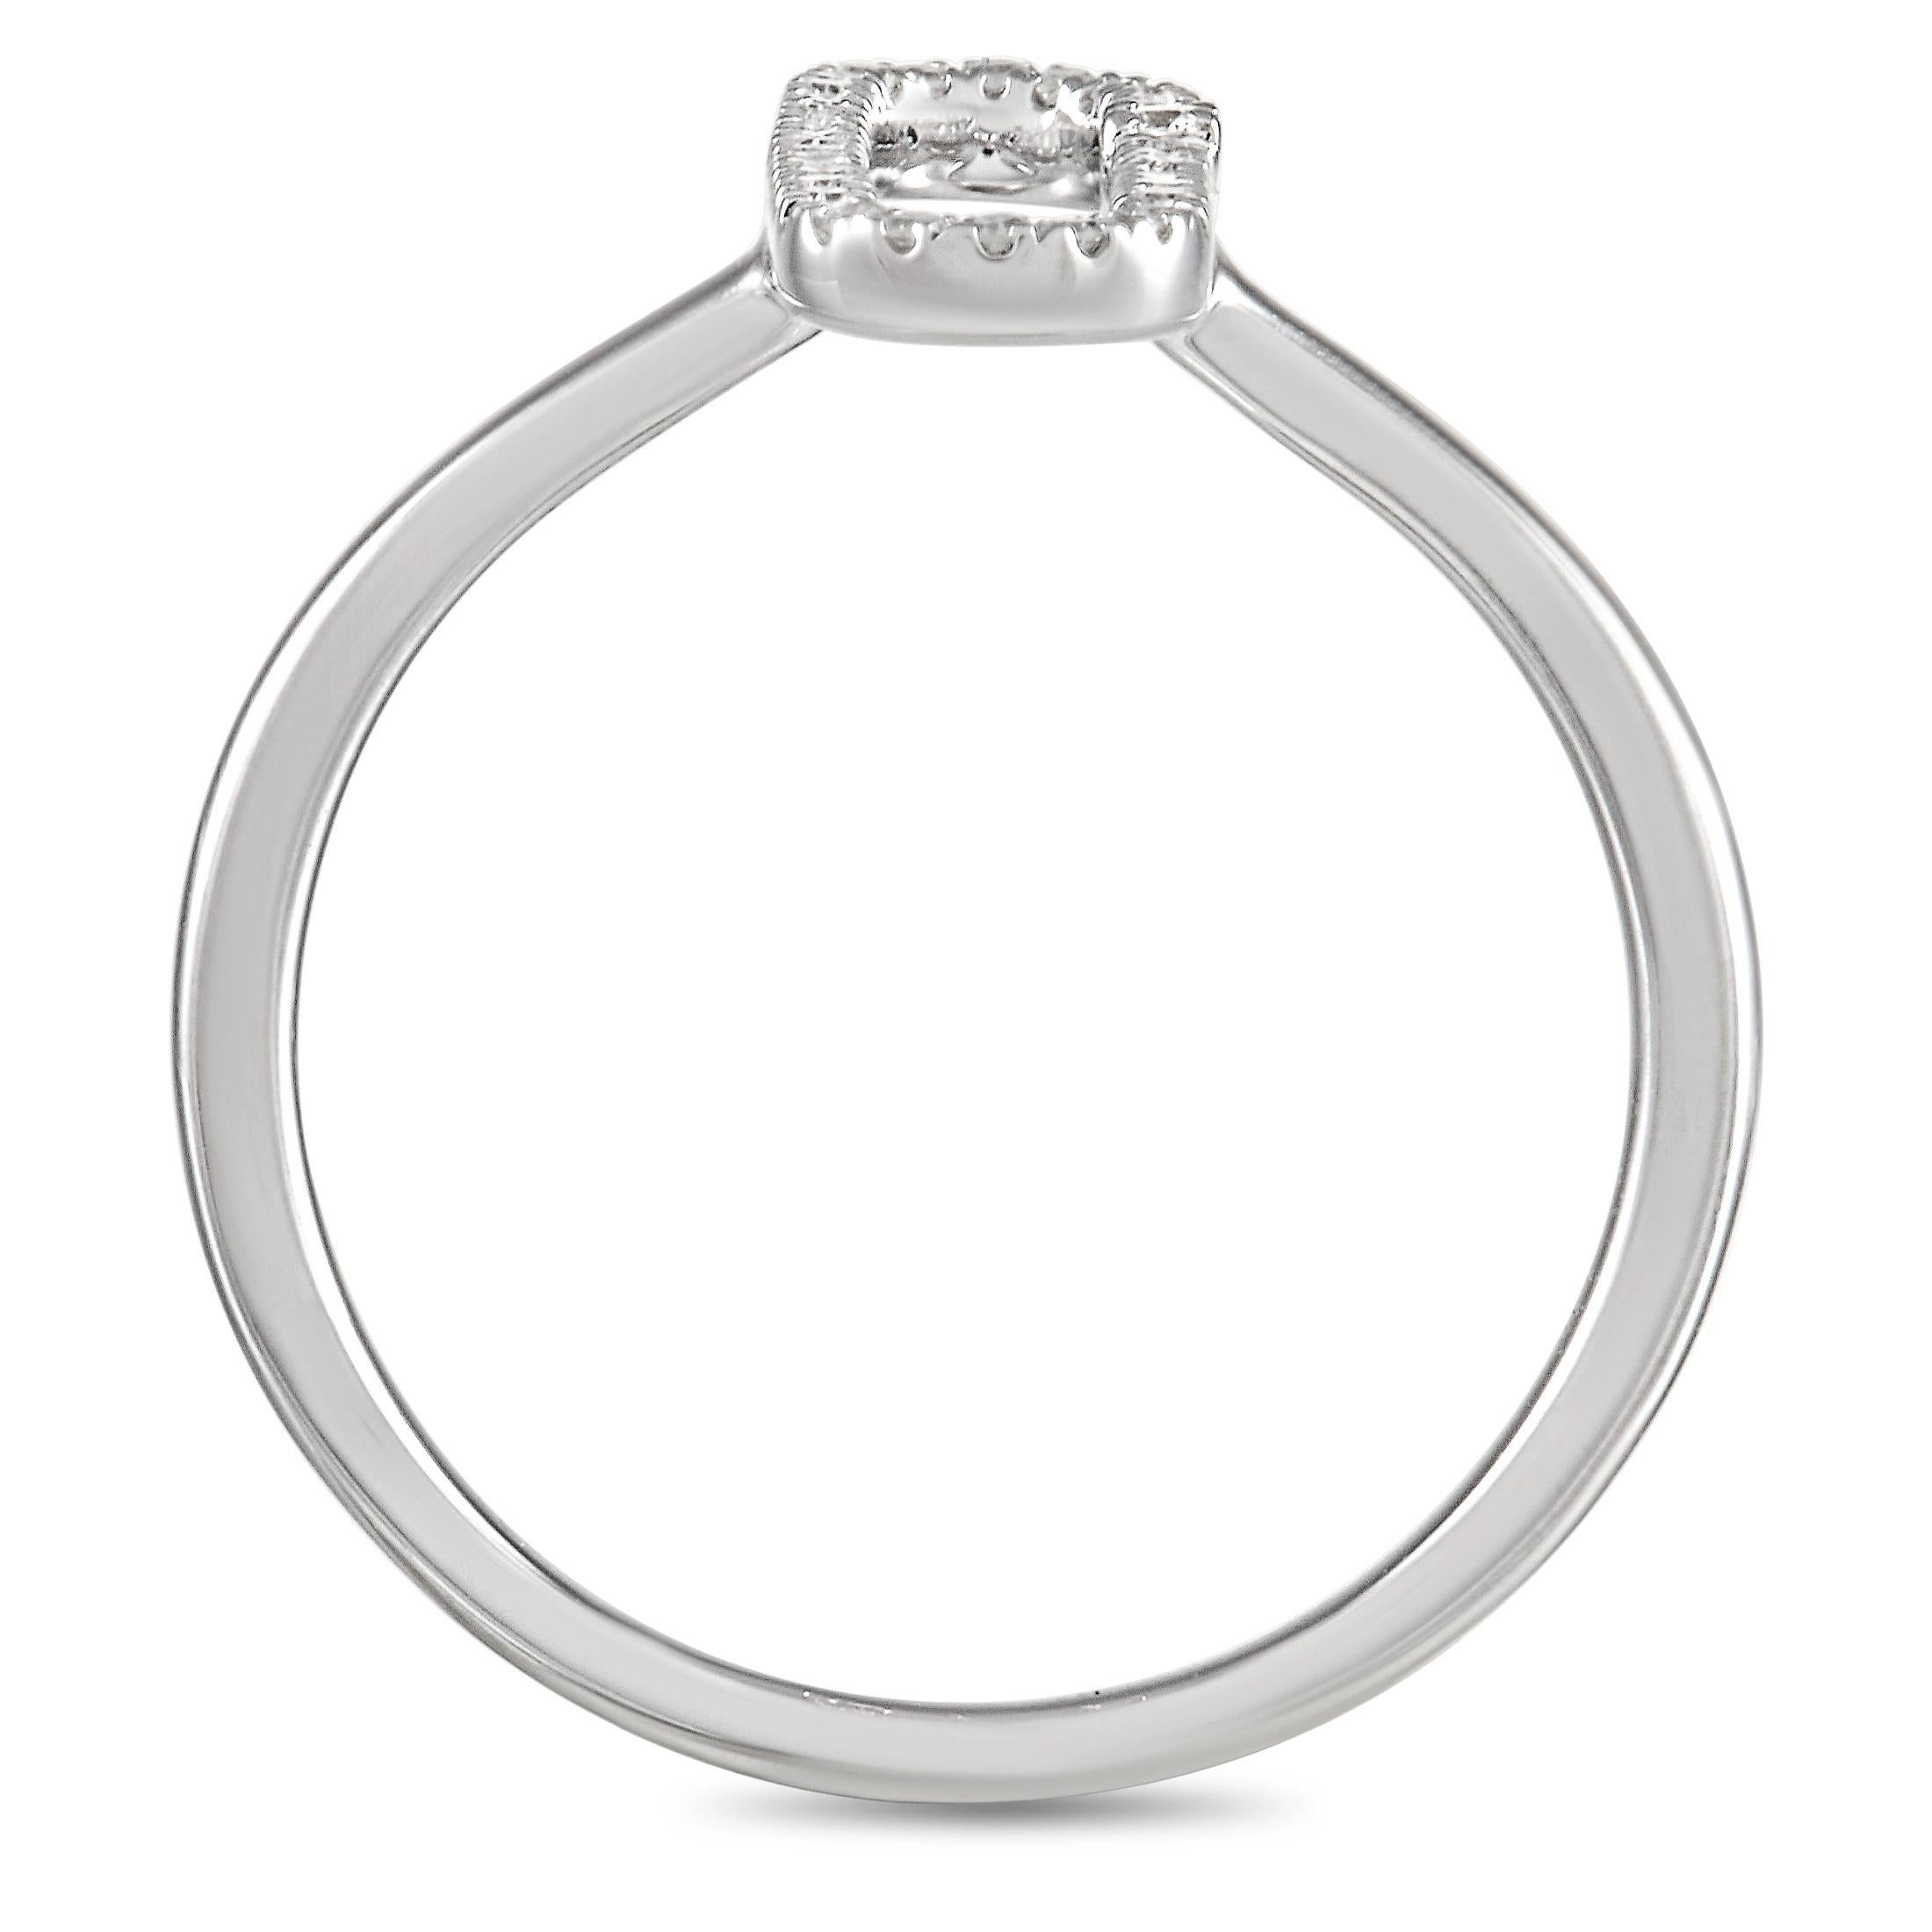 A chic, minimalist design gives this ring a contemporary appearance. At the center of the 14K White Gold setting - which features a top height and band width measuring 1mm - you’ll find an oval-shaped accent with dramatic negative space at the